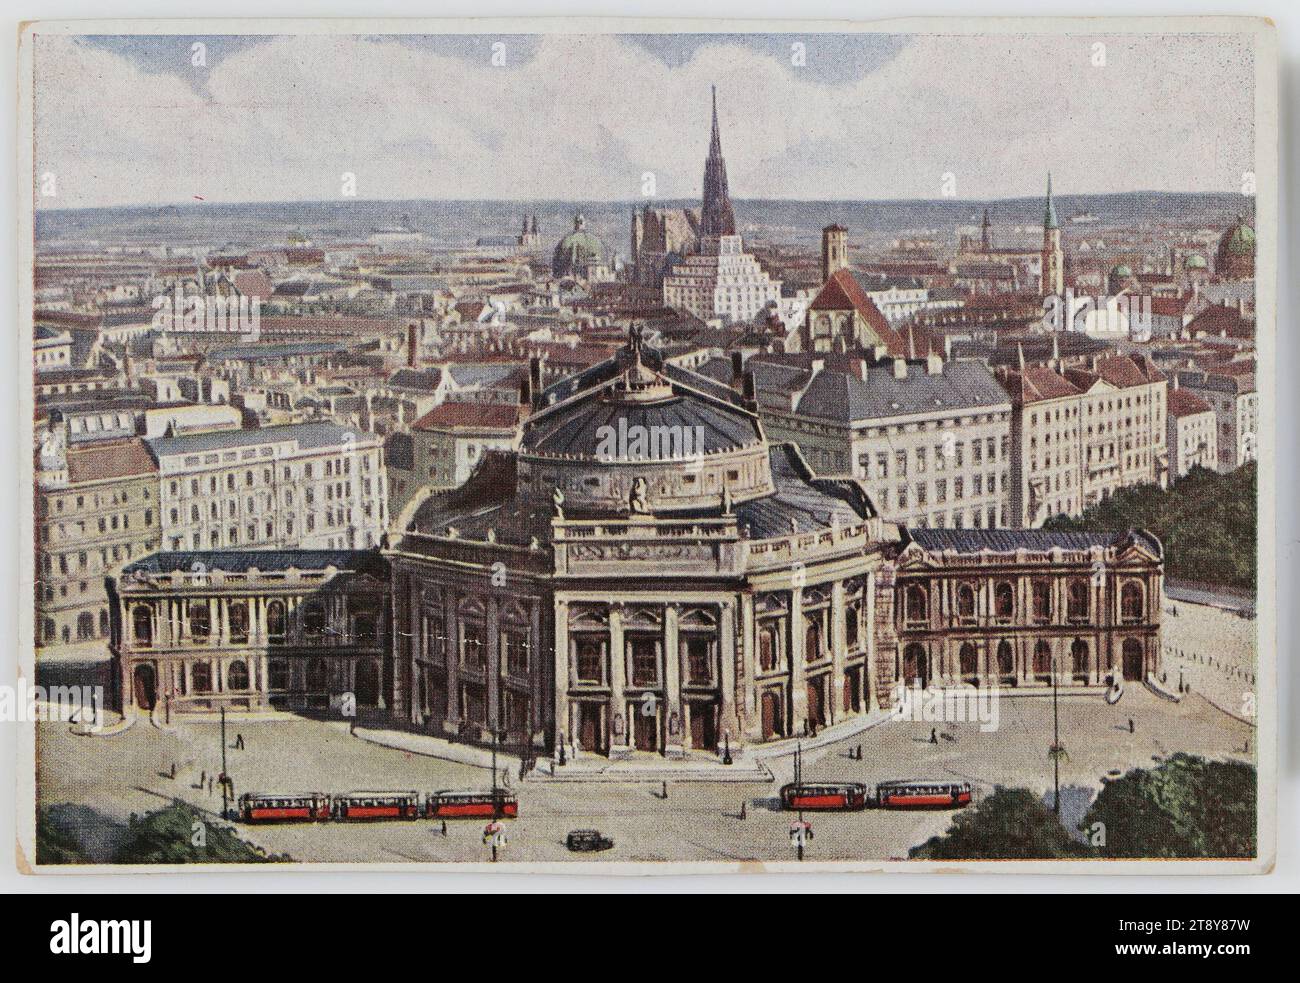 Vienna, Burgtheater, PAG Wien Verlag, producer, date after 1933, cardboard, halftone print, height×width 9.8×14.4 cm, Ringstraße, sights, theater, St. Stephen's Cathedral, public transportation, media and communication, traffic and transportation, 1st district: inner city, theater (building), roof (of house or building), railroad, tramway; cogwheel railroad, with people, The Vienna Collection Stock Photo